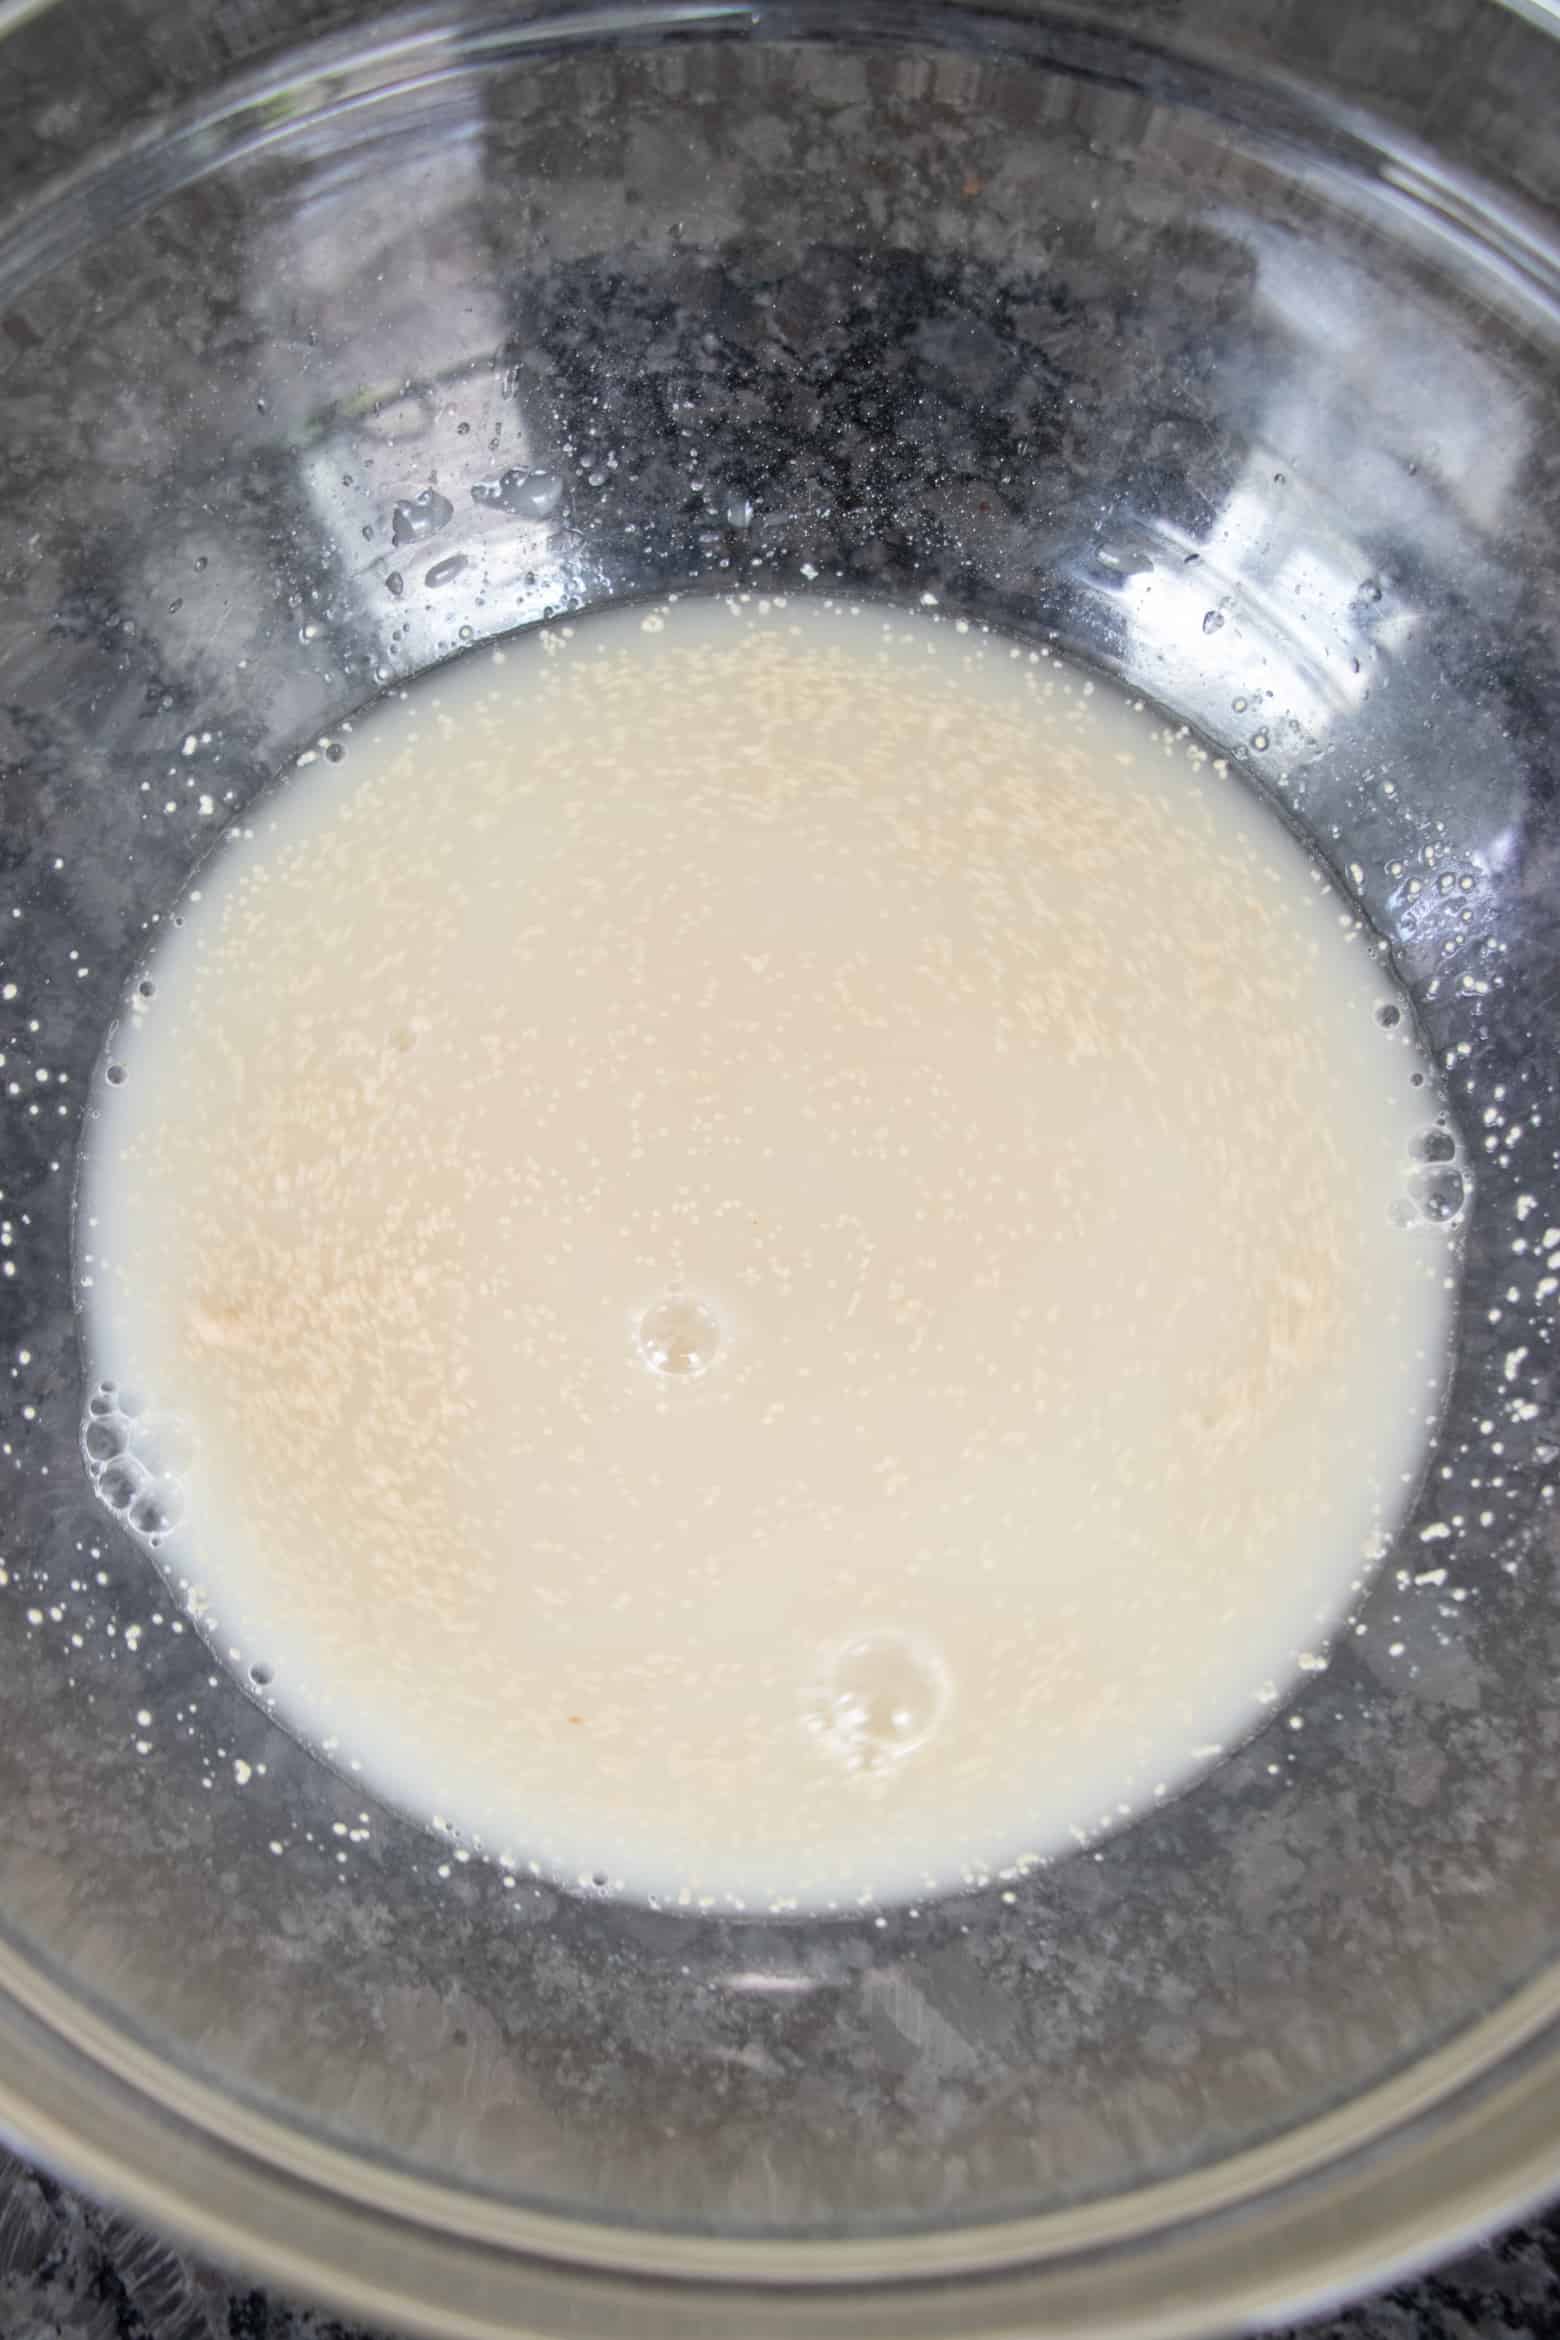 yeast in a bowl with warm water